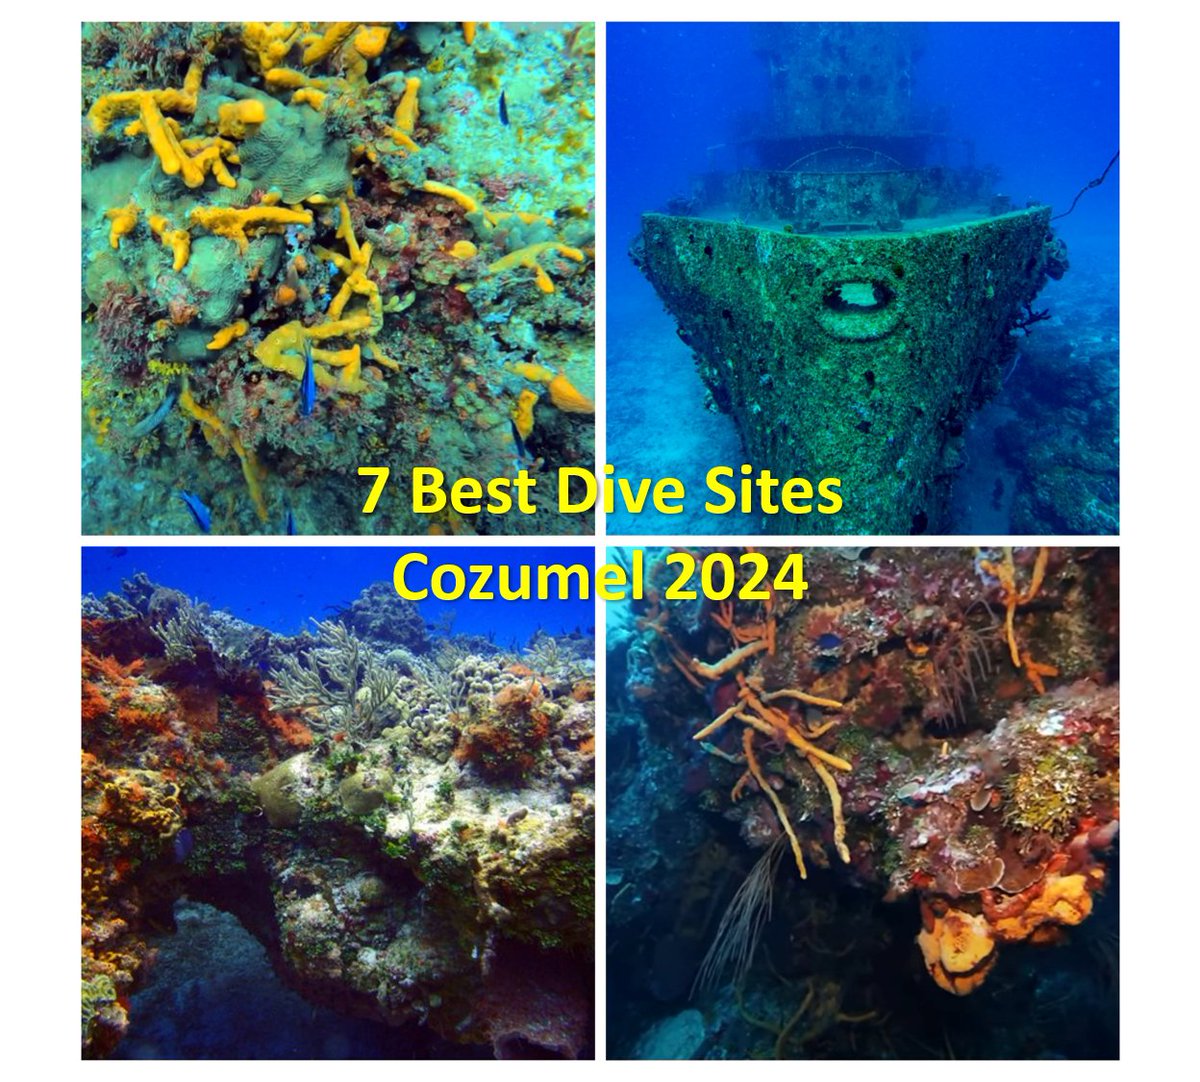 7 Best Dive Sites in Cozumel in 2024 As rated on TheScubaDirectory View the full list & rate your favorite: thescubadirectory.com/dive-guides/Me… #Cozumel #Mexico #Cozumelbetterthanever #wreck #coral #reef #underwaterphotography #ScubaDivingMag #PADI #paditv #scubadivelife #scubadive #dive